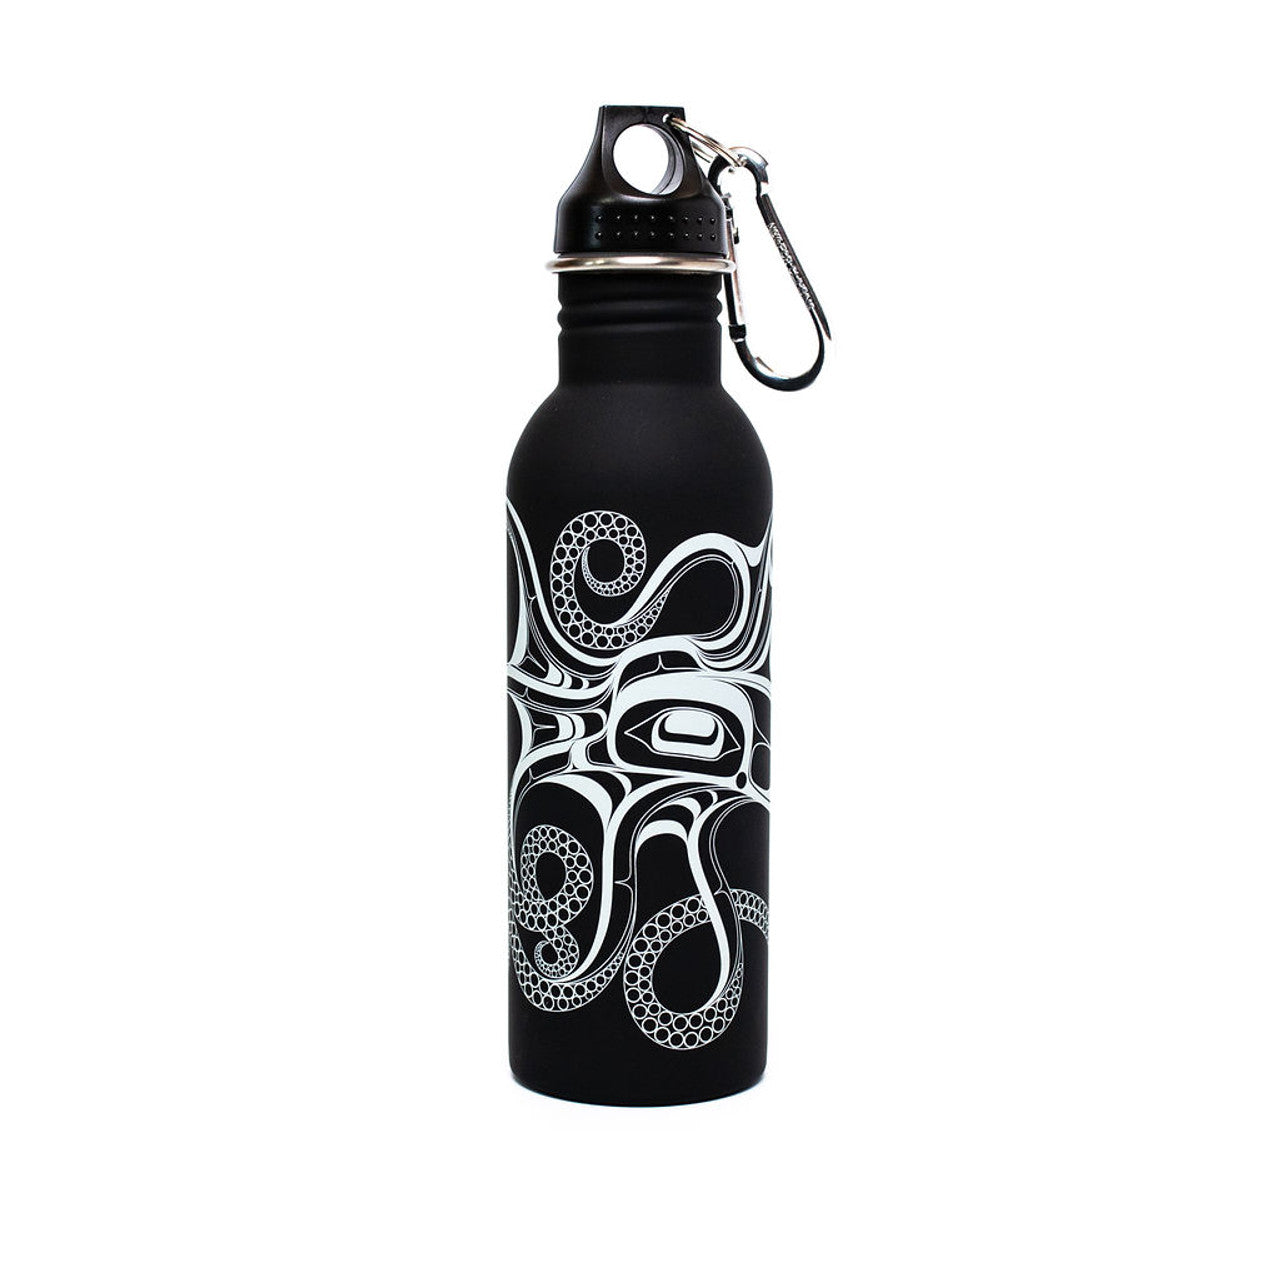 Water Bottles - Ernest Swanson Octopus / 25oz - WBS25 - House of Himwitsa Native Art Gallery and Gifts